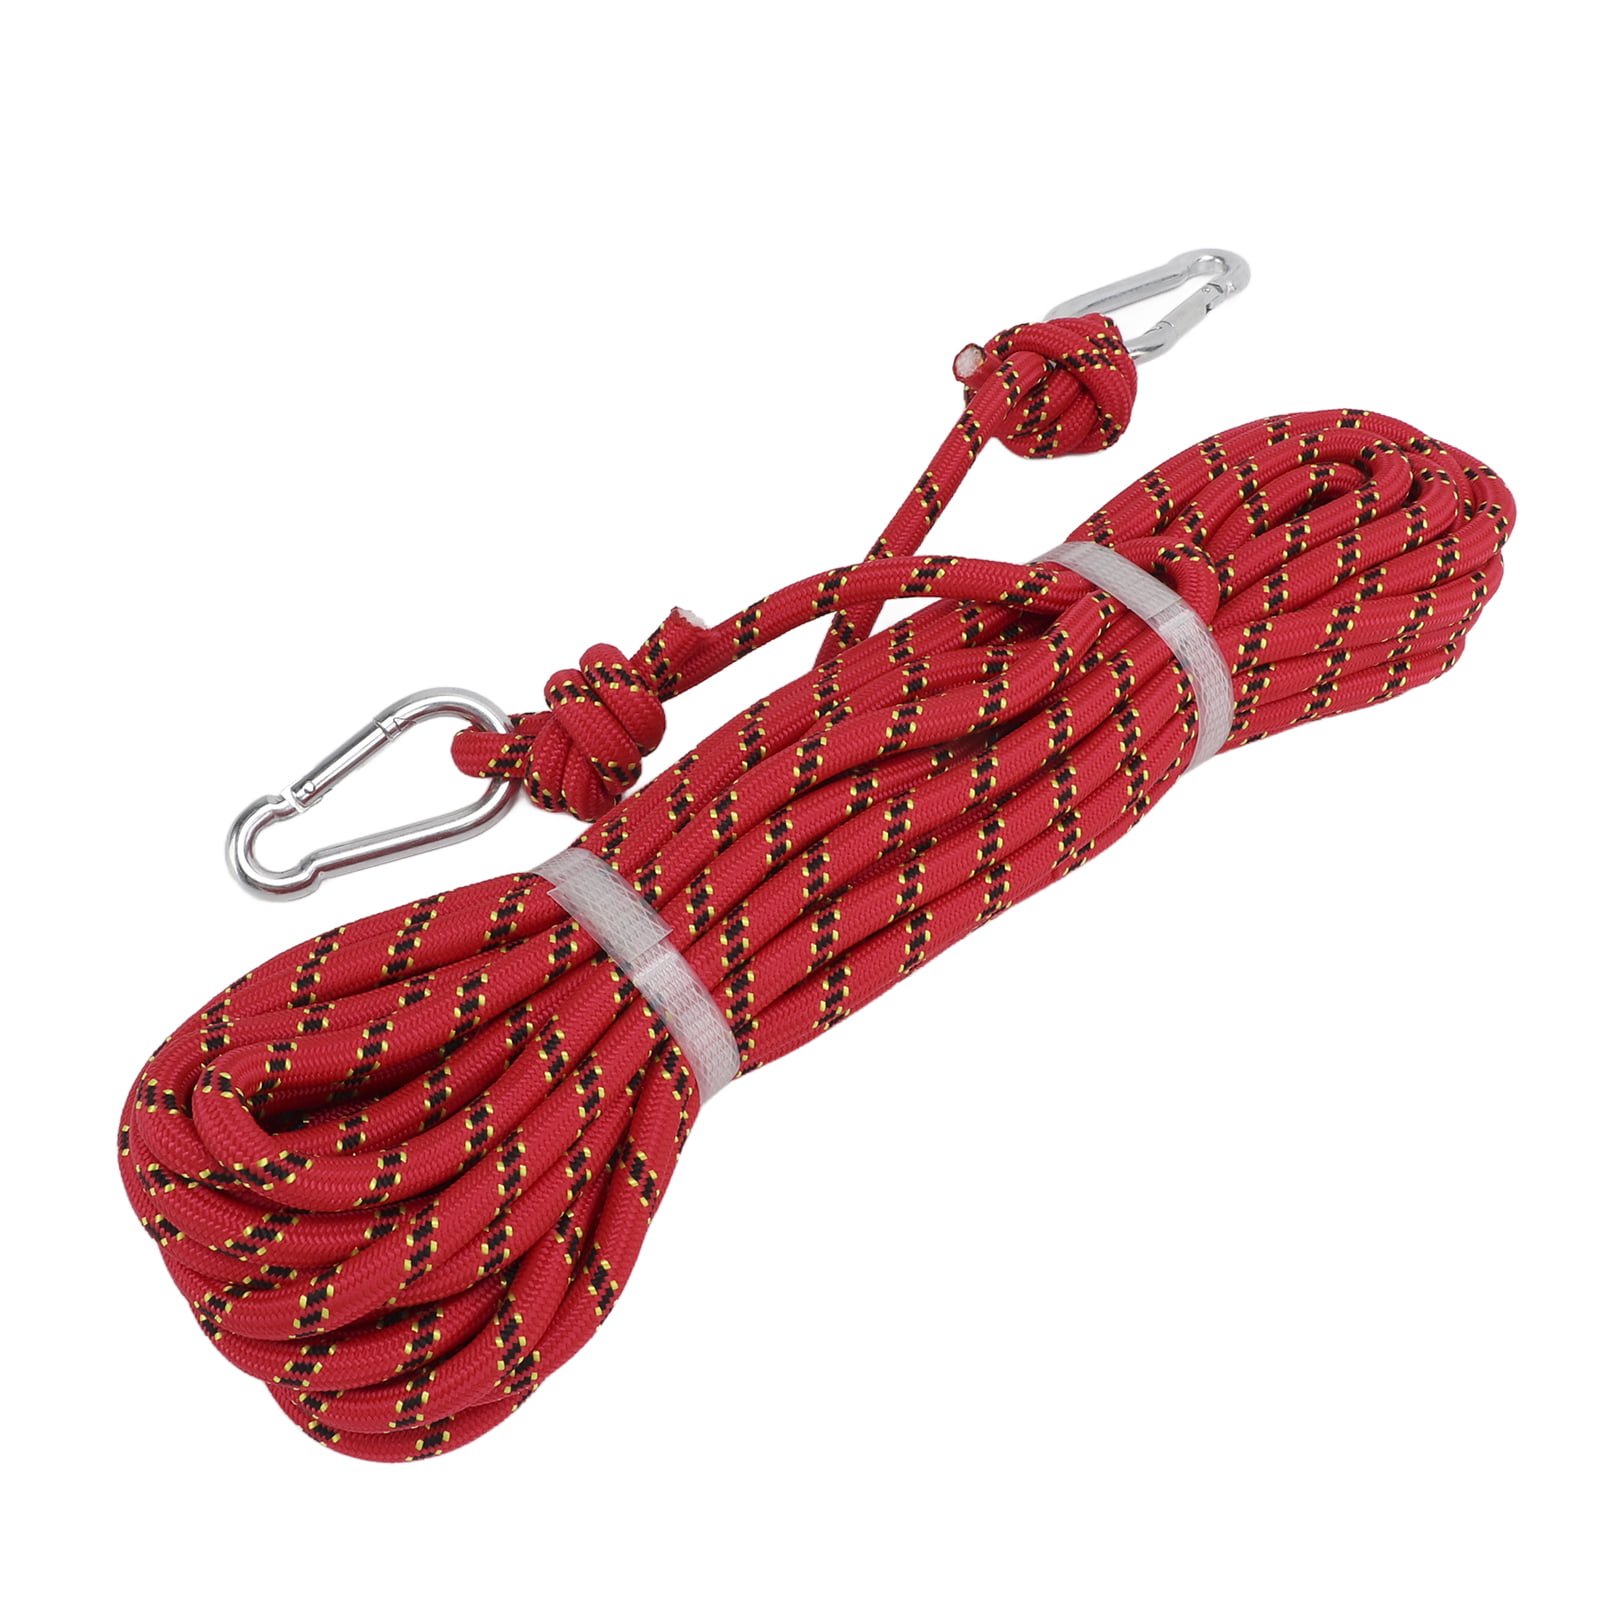 10mm 10-15M Climbing Rope Safety Mountain Rescue Escape Auxiliary Tent New Goods 